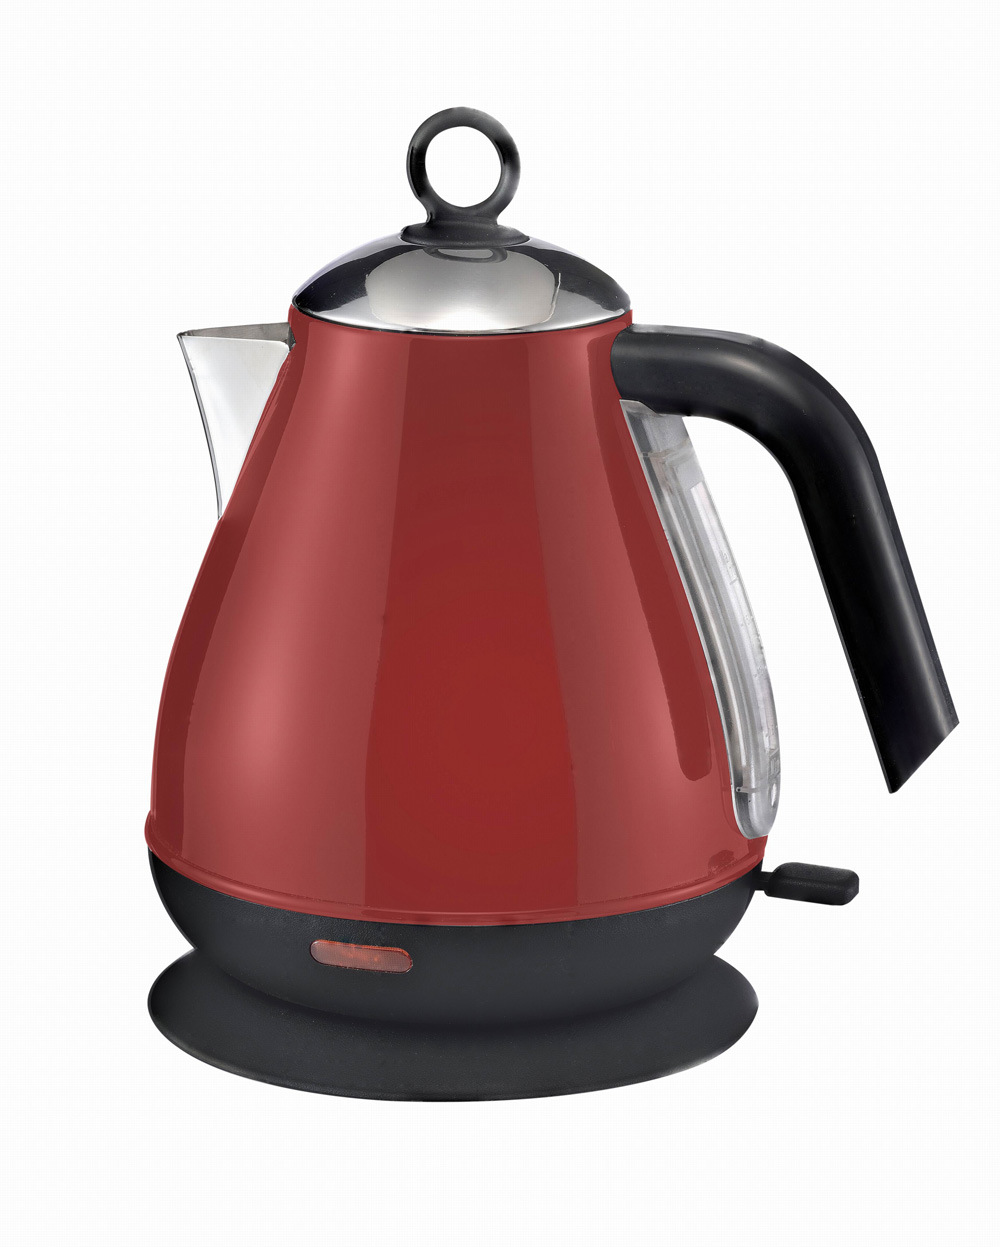 1.7liter Stainless Steel Electric Water Kettle Pot